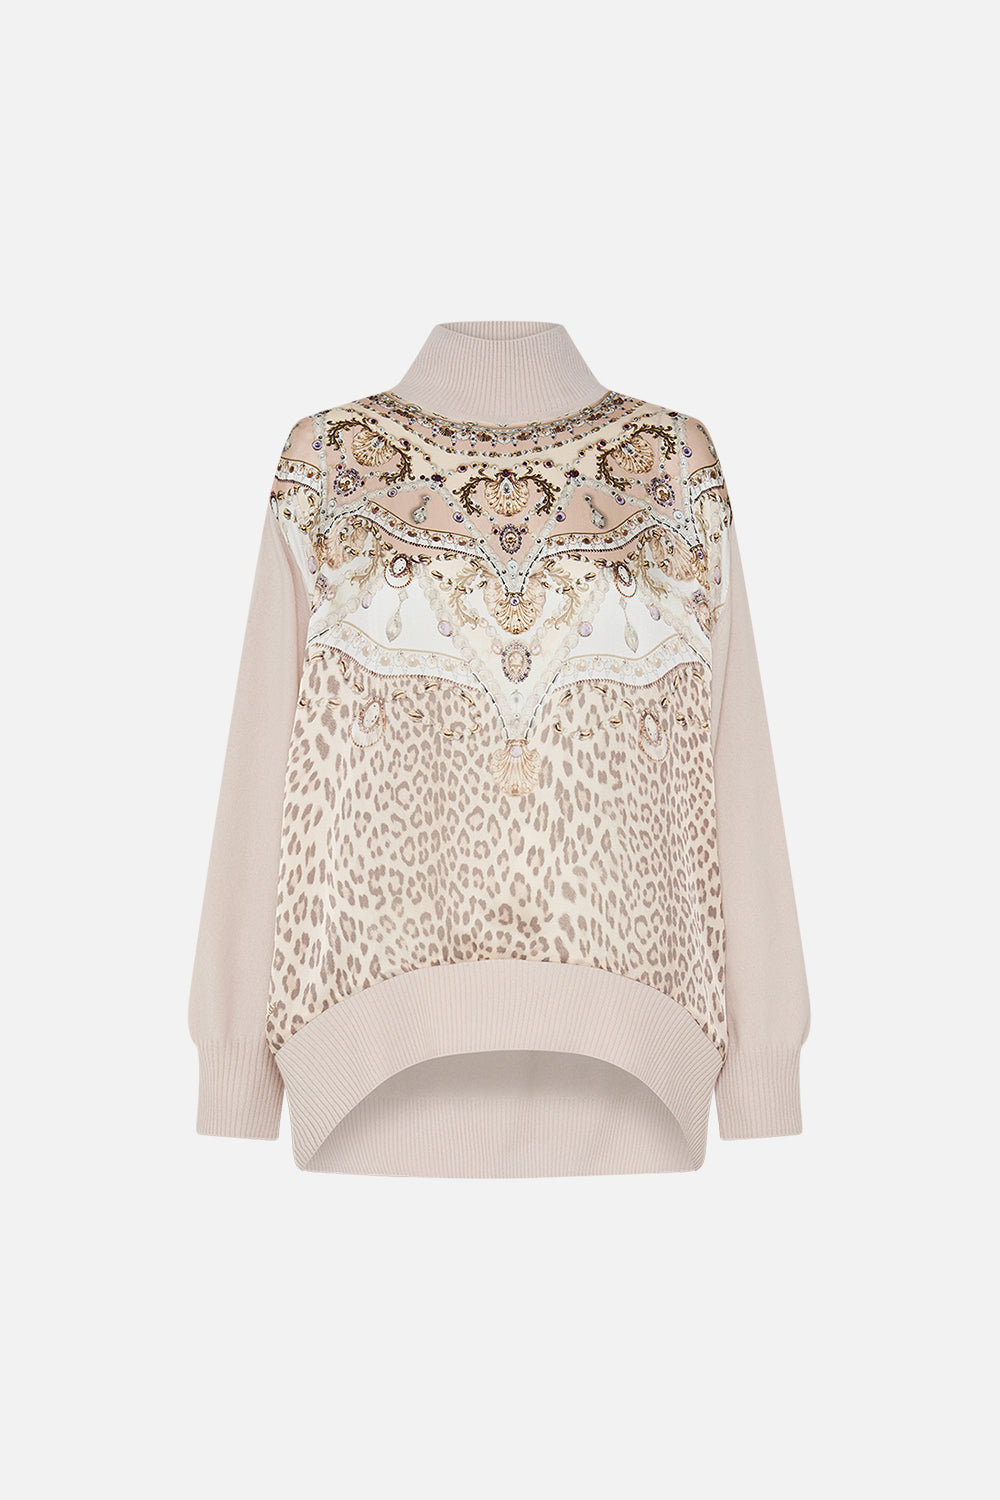 SILK FRONT TURTLE NECK KNIT GROTTO GODDESS